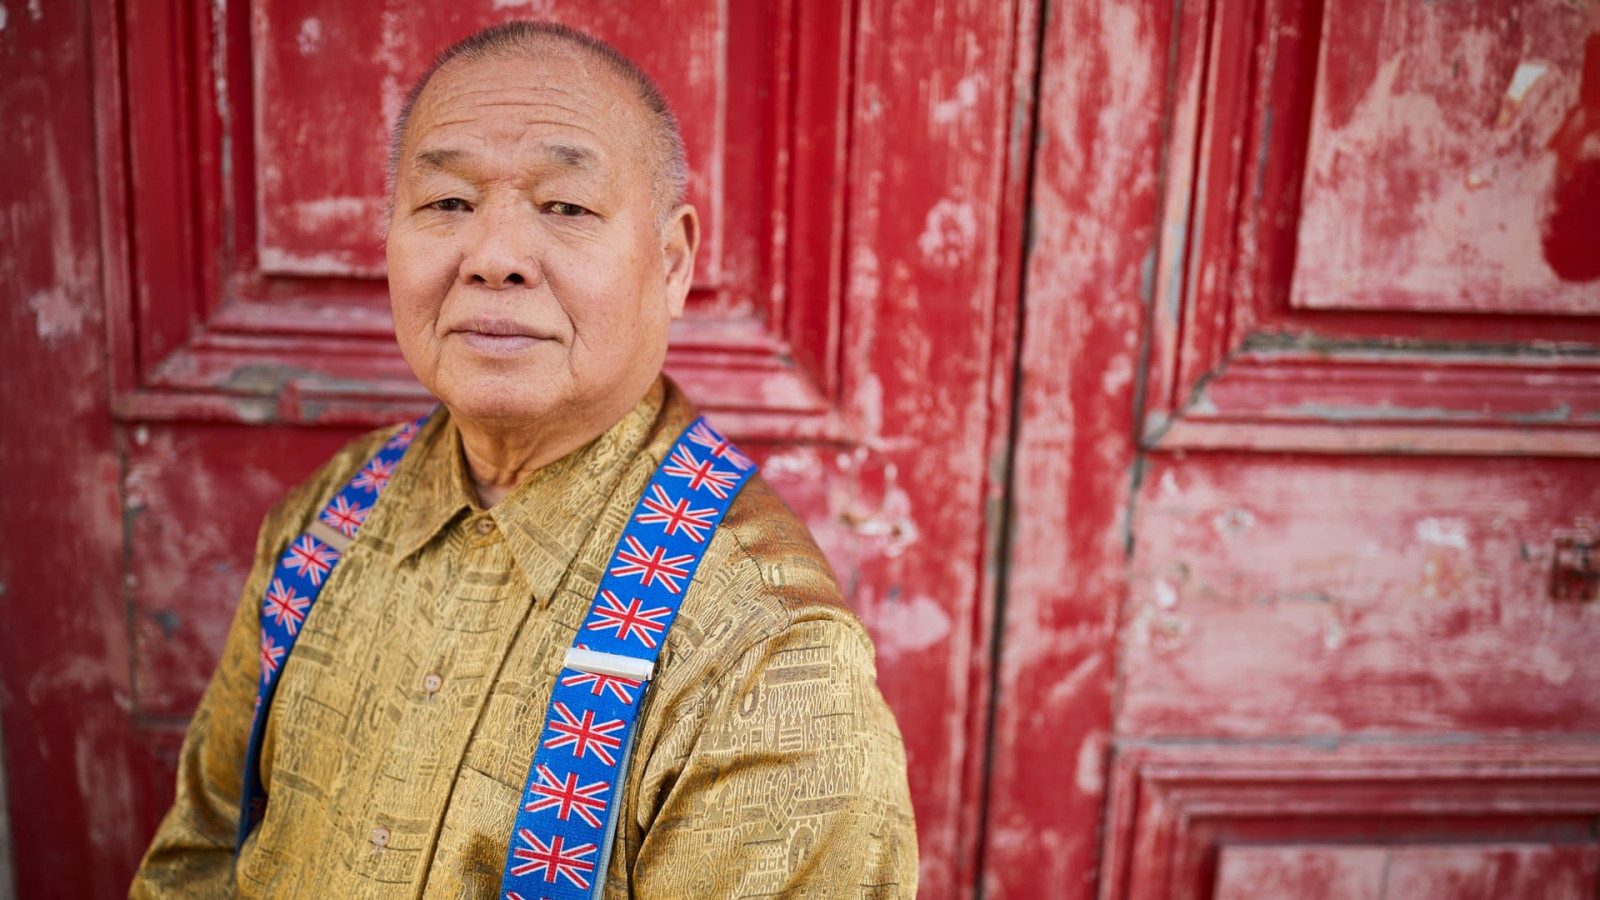 Sam, a 68 year-old Malaysian man, stands in front of a large red door. Sam wears a gold coloured shirt and union-jack braces.